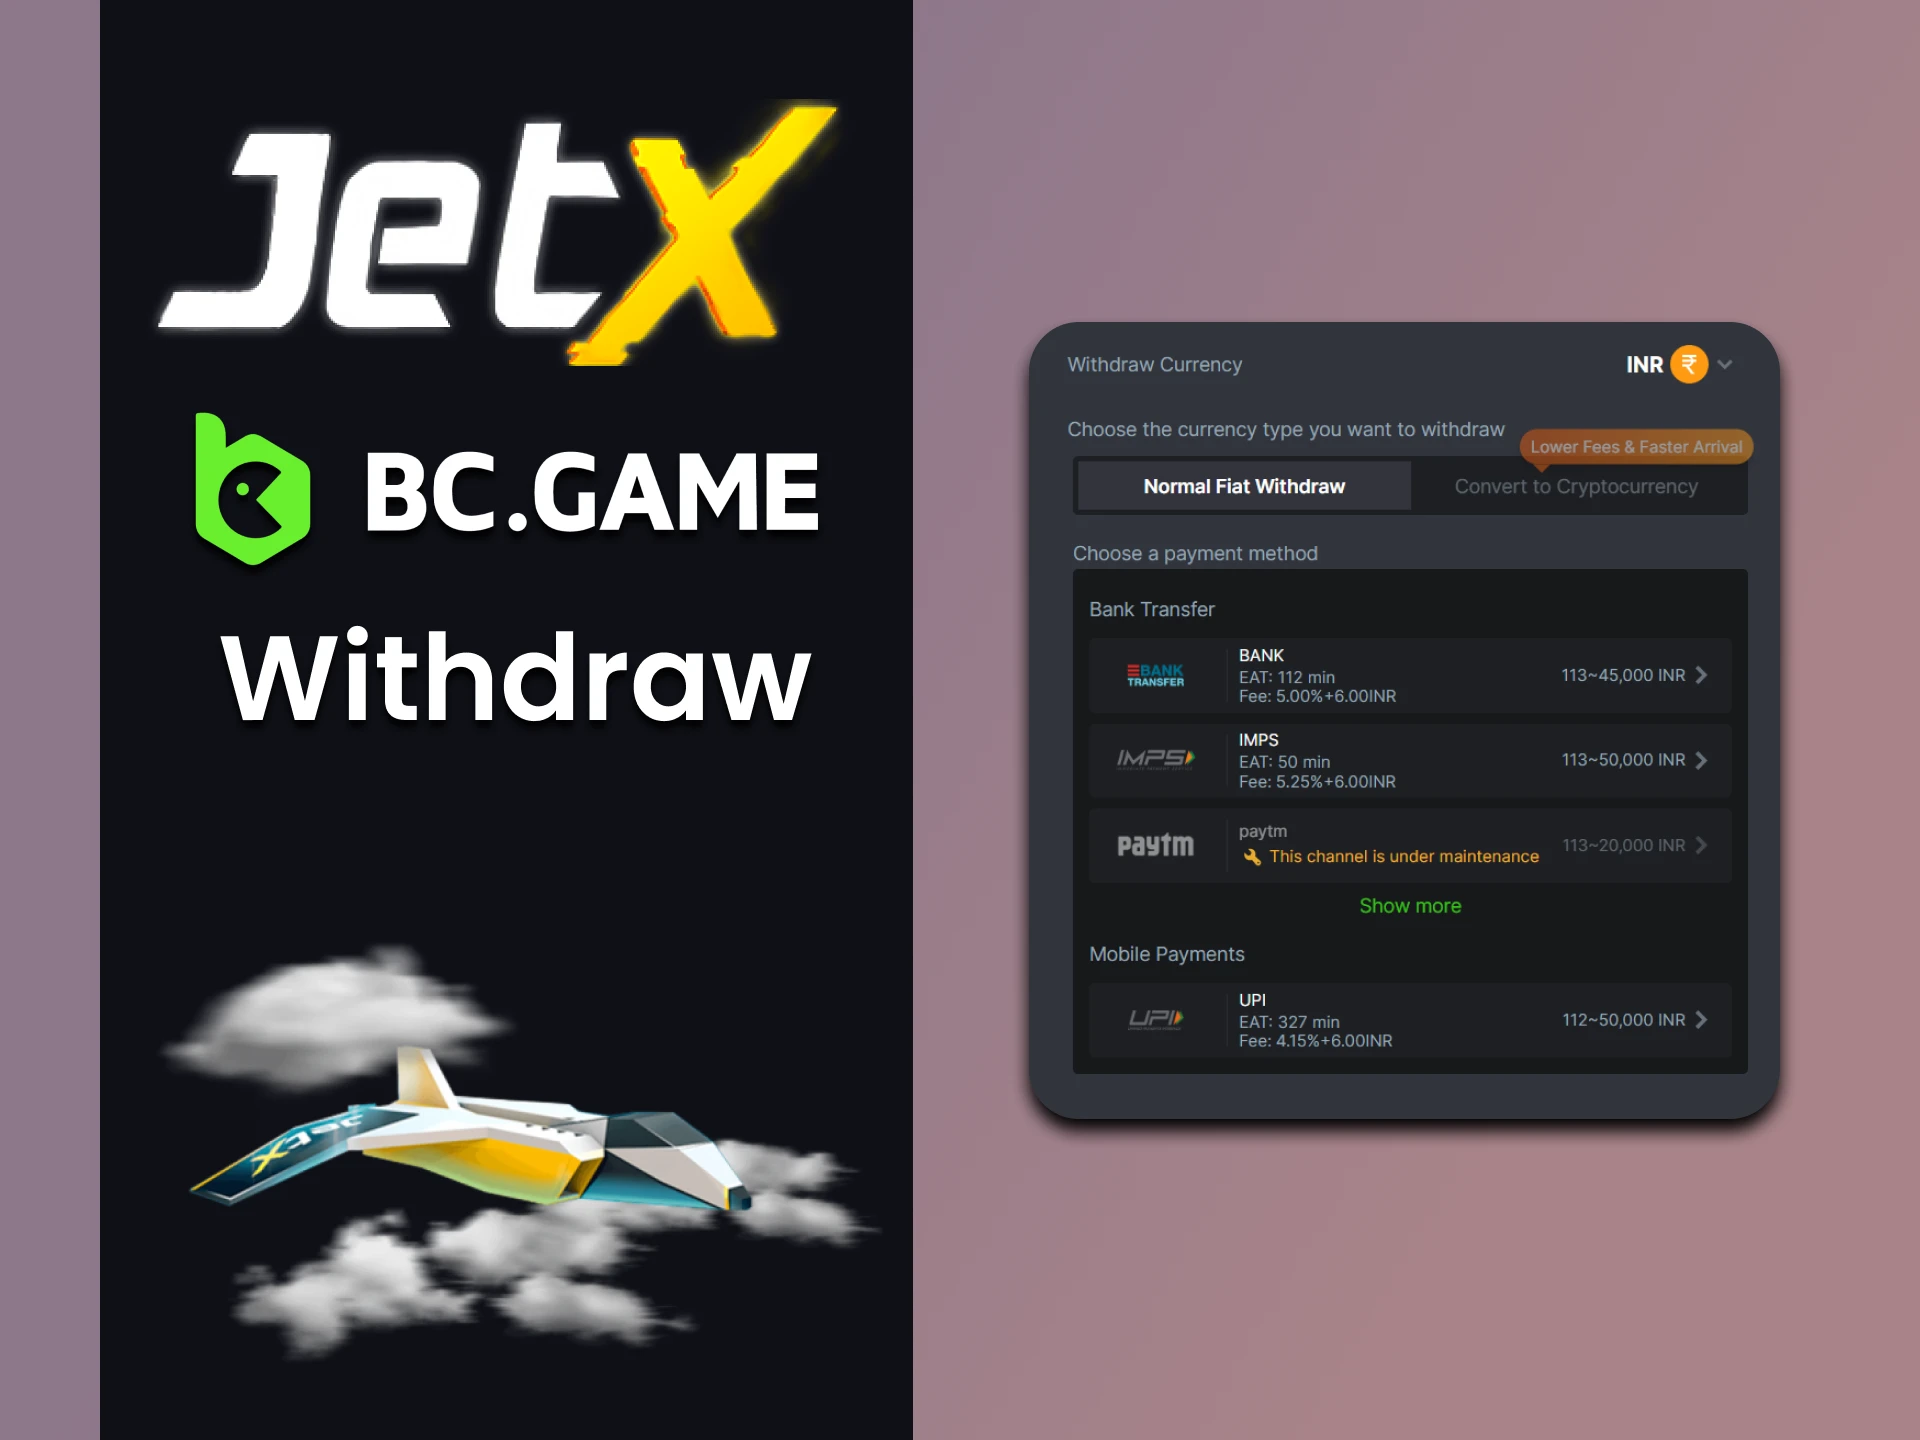 We will tell you how to withdraw funds for the JetX game on BC Game.